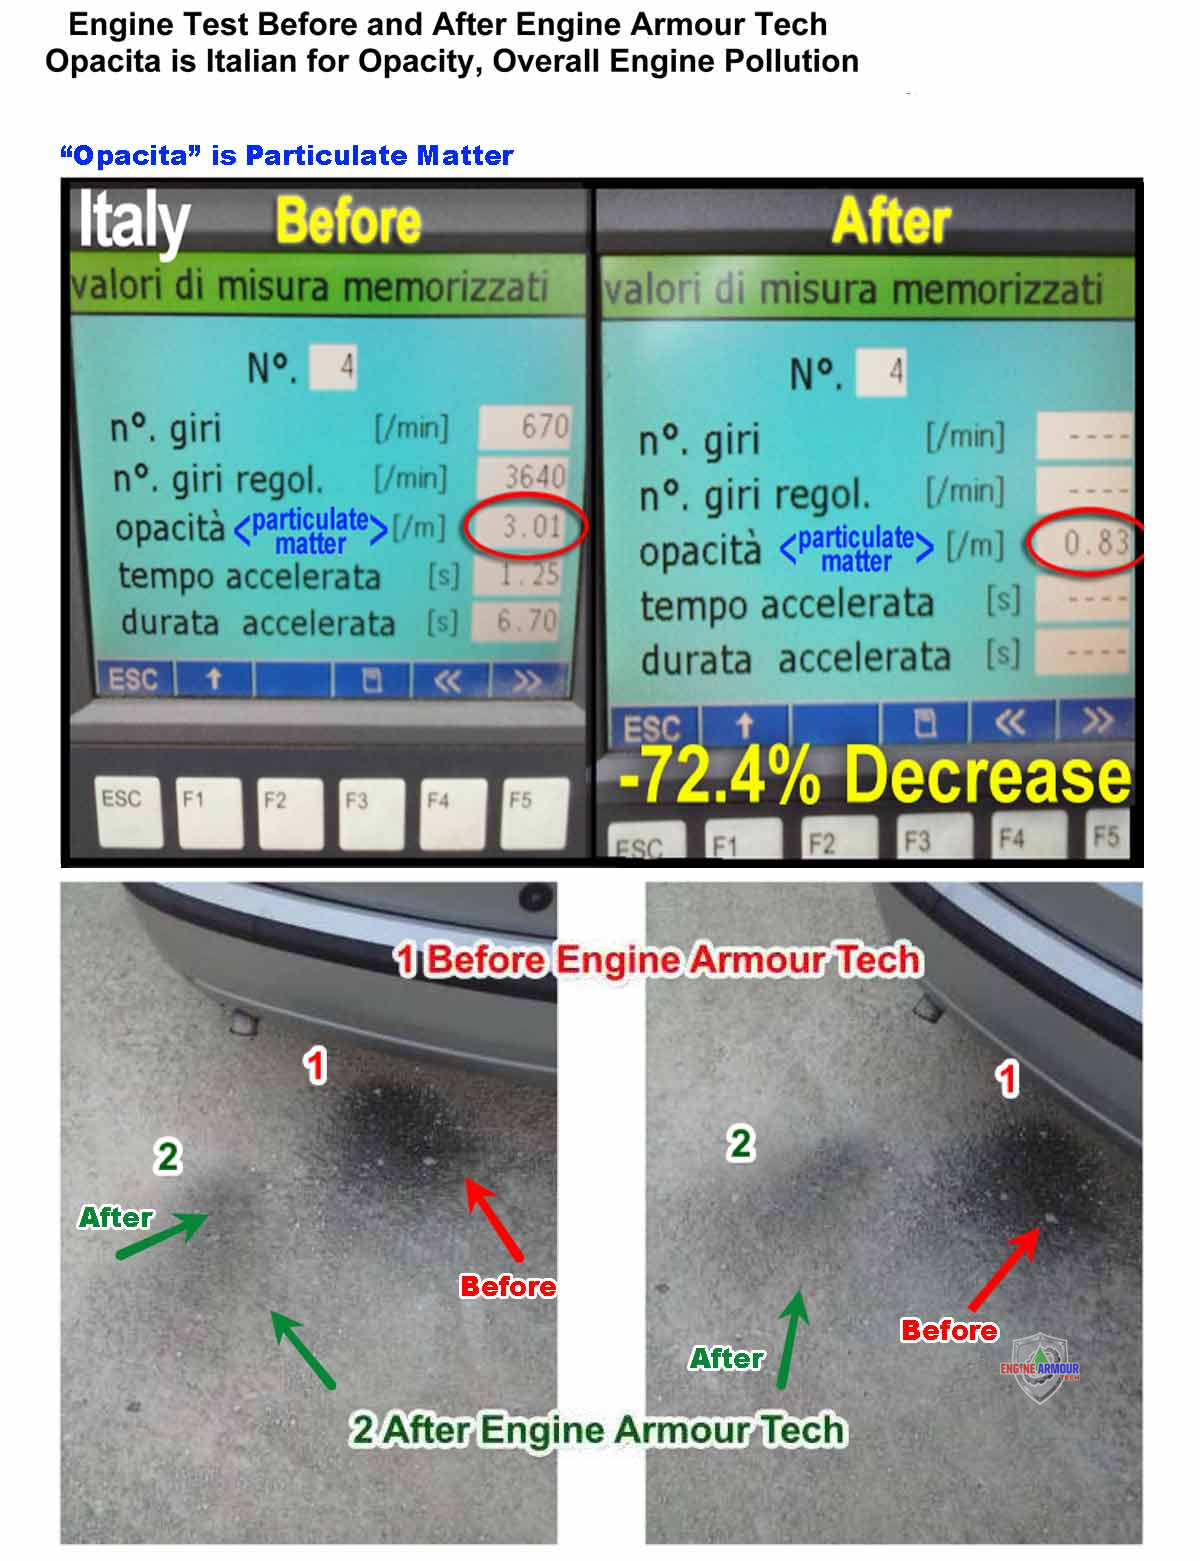 Italy Particulate Matter Reduction